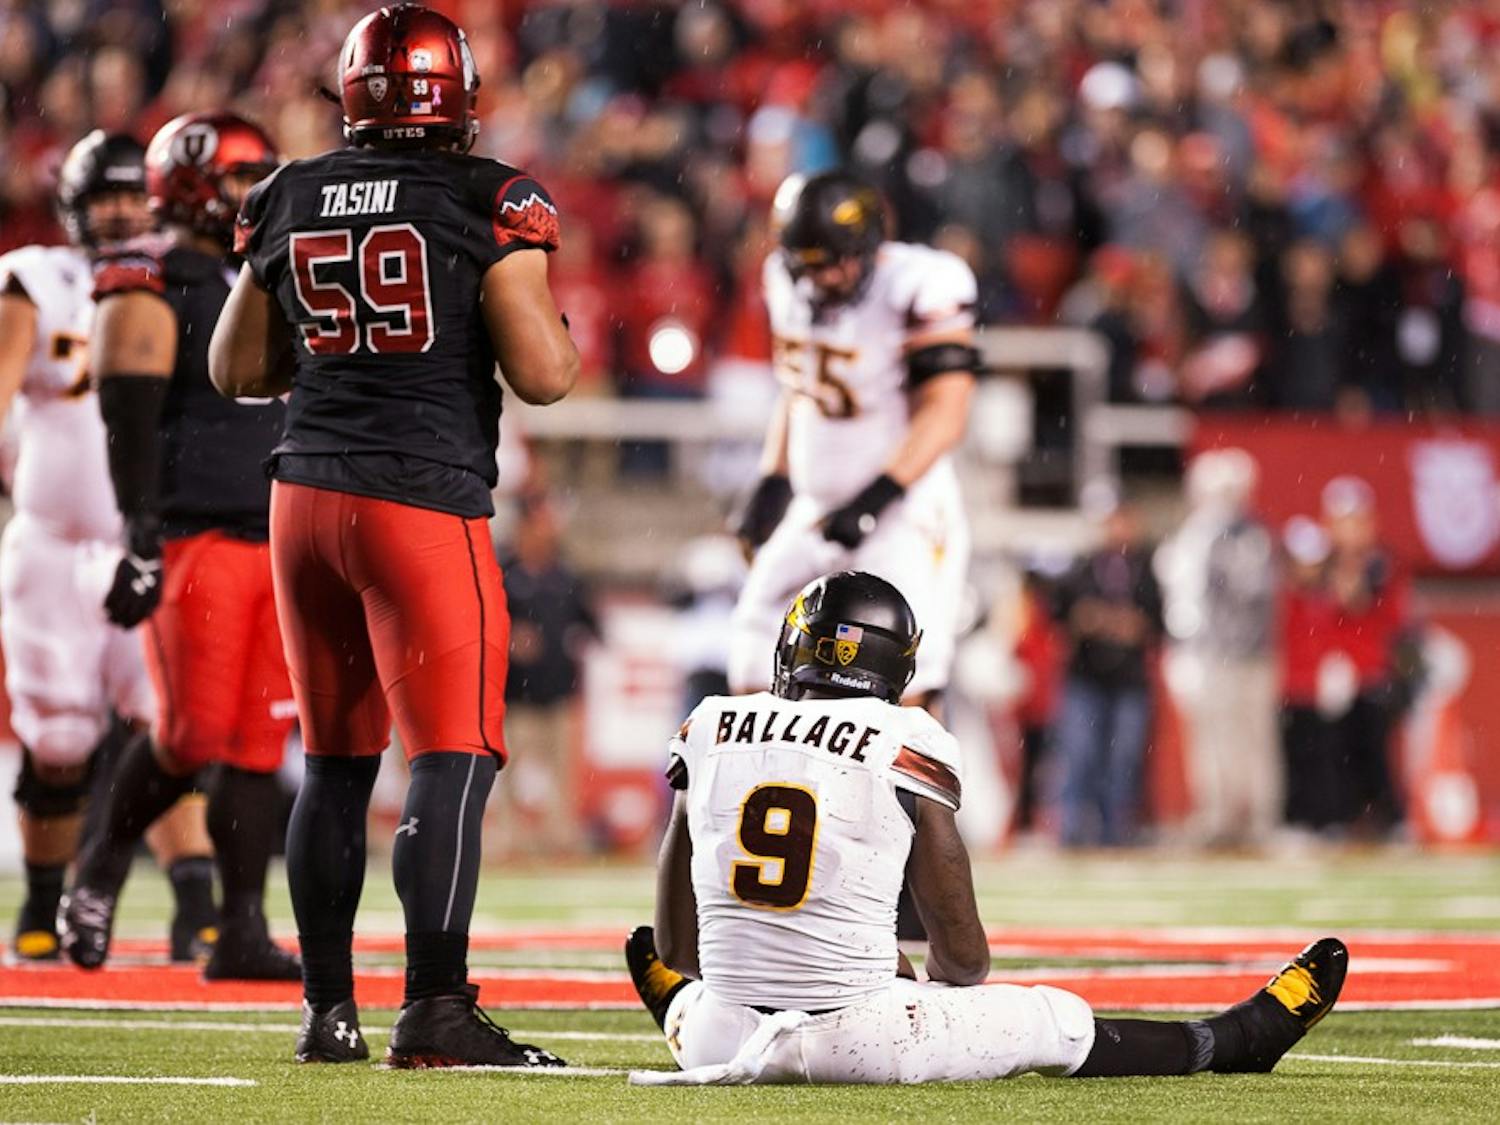 Photos: ASU football loses to Utah for first time in 12 years